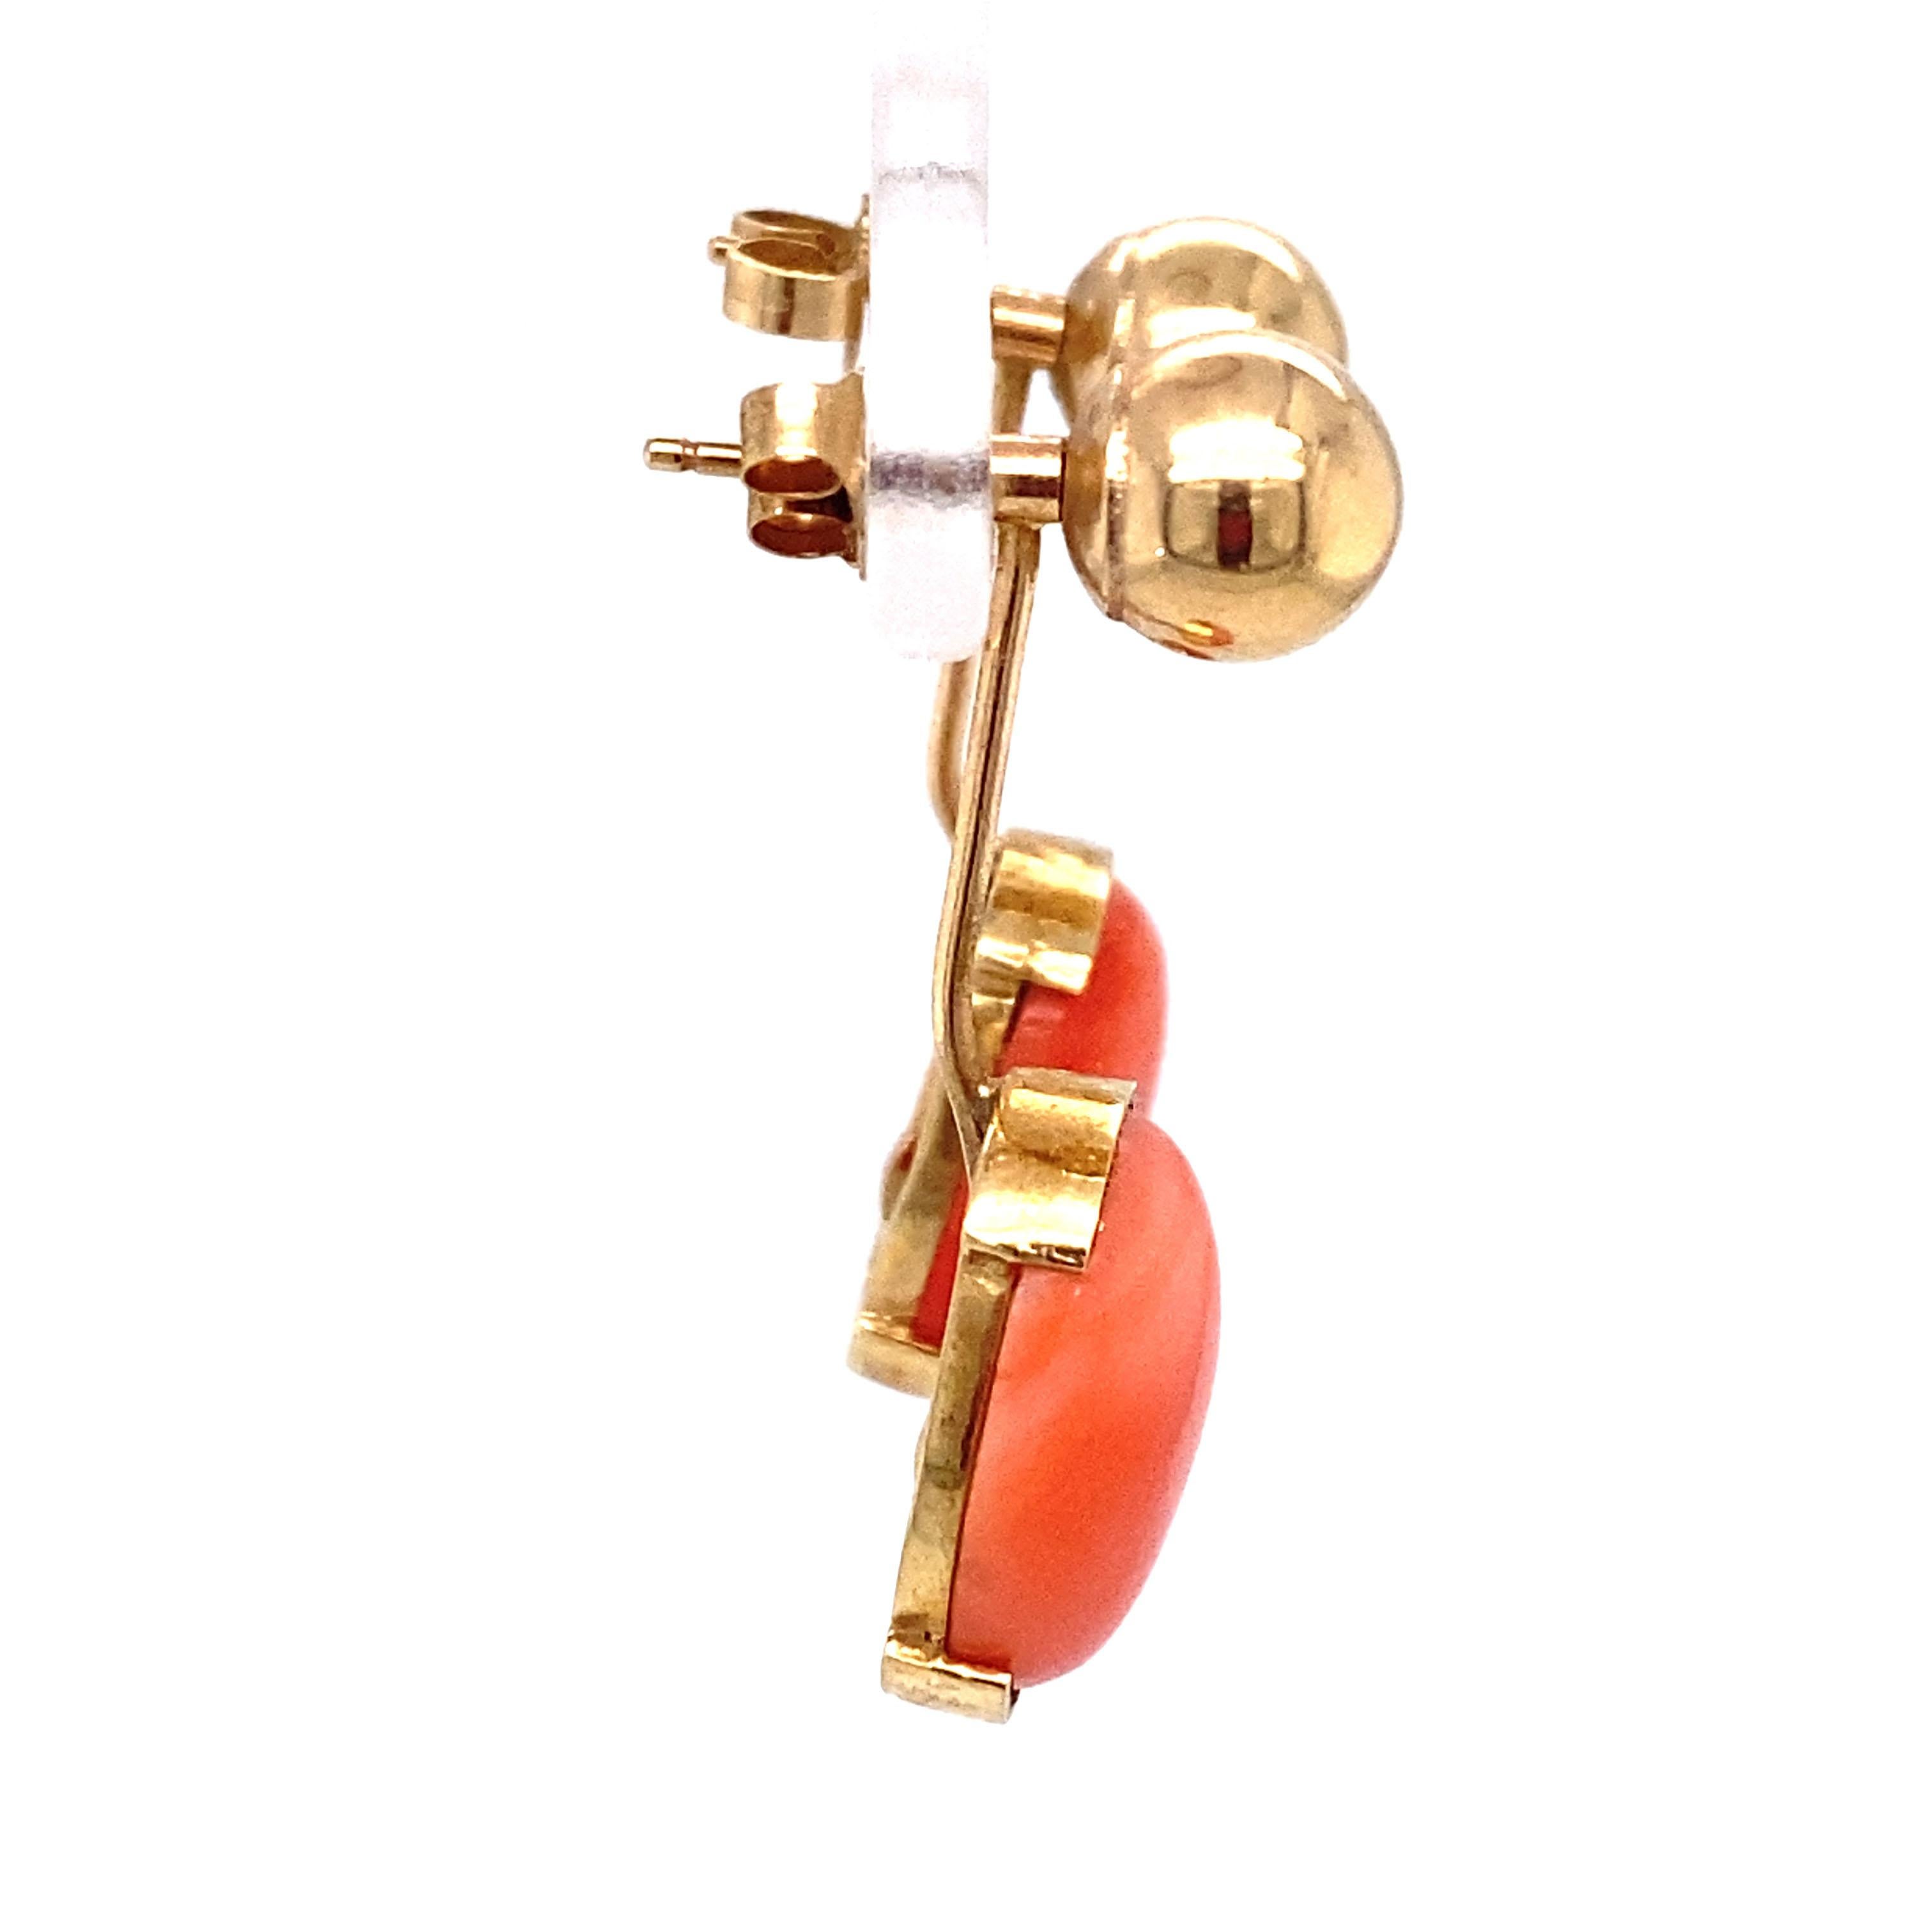 Item Details: These gold earrings have ball studs with dangles of oval coral that are removable.

Circa: 1970s
Metal Type: 14 karat yellow gold
Weight: 4.7 grams
Dimensions: 1 inch Length